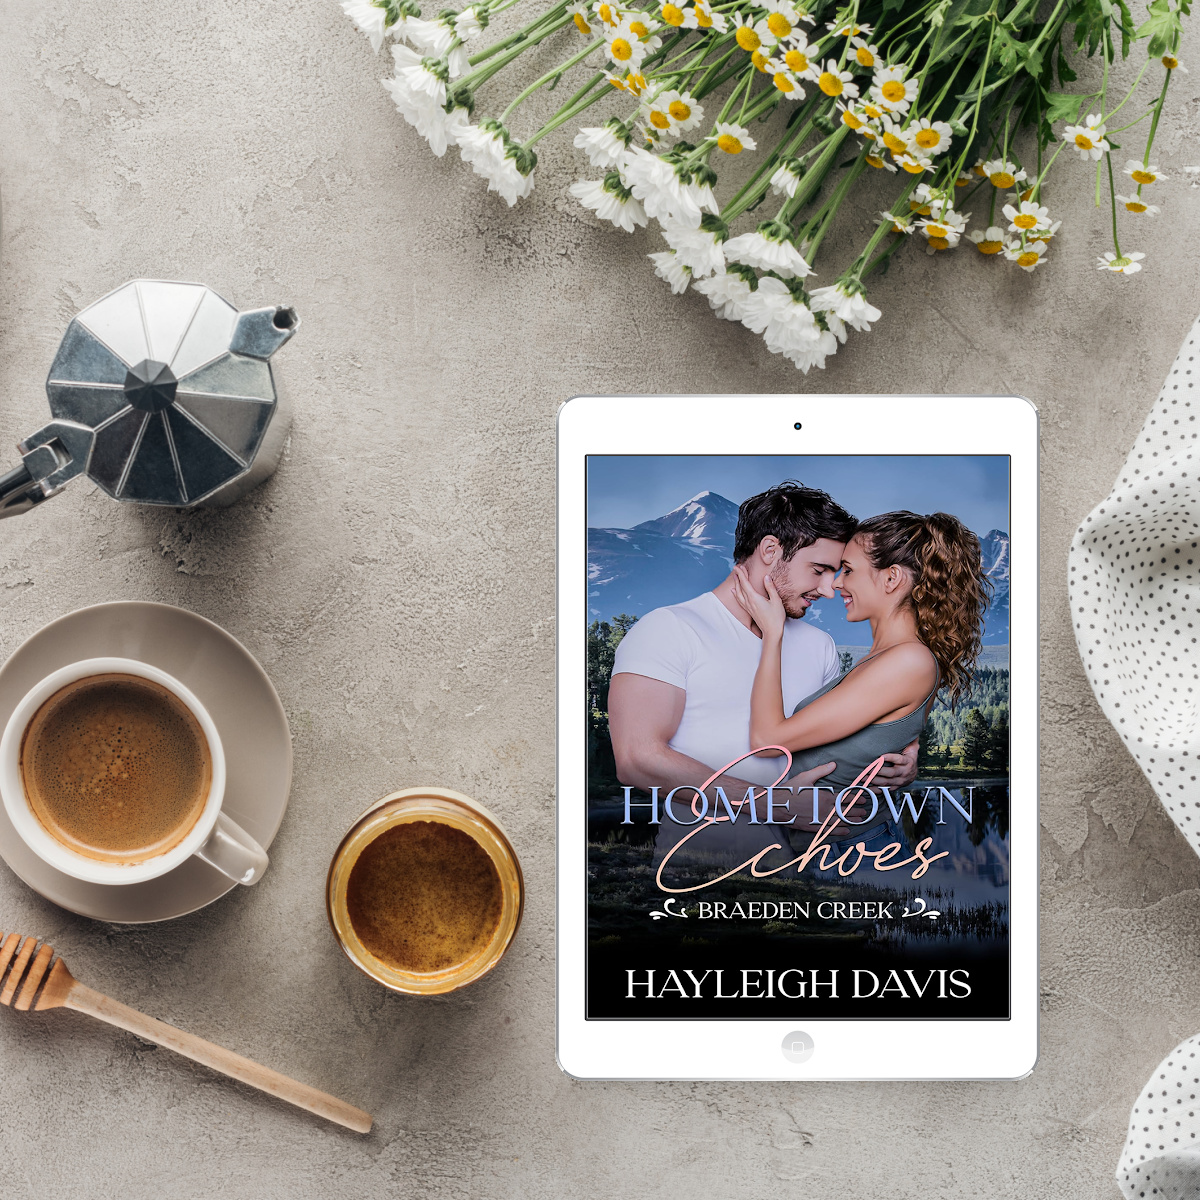 SMALL TOWN BROTHER'S BEST FRIEND ROMANCE ALERT 🚨 Hometown Echoes by Hayleigh Davis is available now!! Universal: geni.us/HometownEchoes #releaseboost #booklaunch #newbooks #hometownechoes #braedencreek #romancenovels #romancebooks #smalltownromance @ElleWoodsPR #1852media